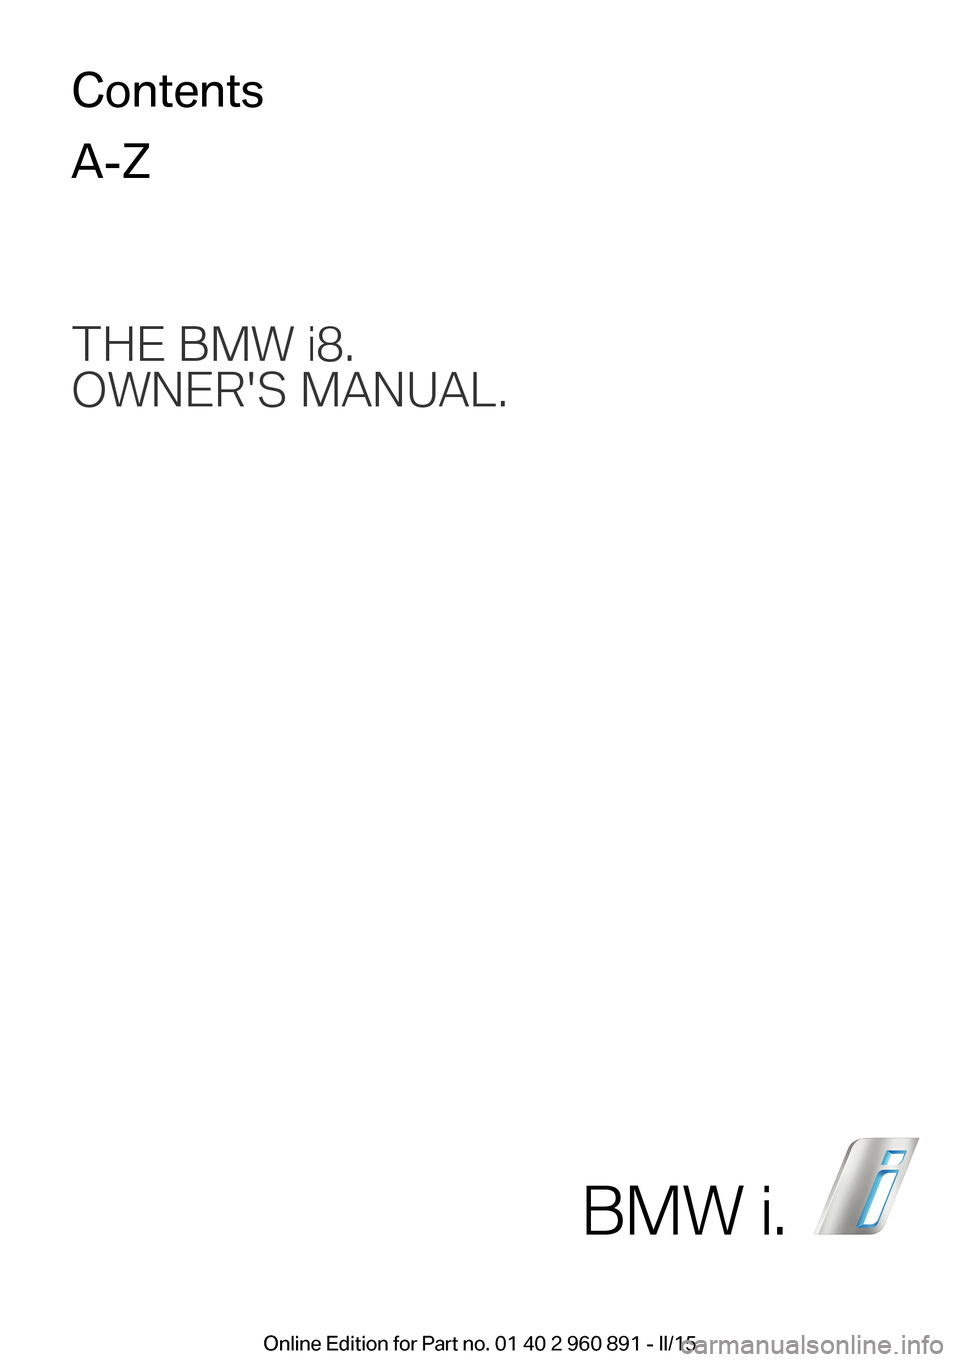 BMW I8 2015 I12 Owners Manual THE BMW i8.
OWNERS MANUAL.ContentsA-Z
BMW i.
Online Edition for Part no. 01 40 2 960 891 - II/15 